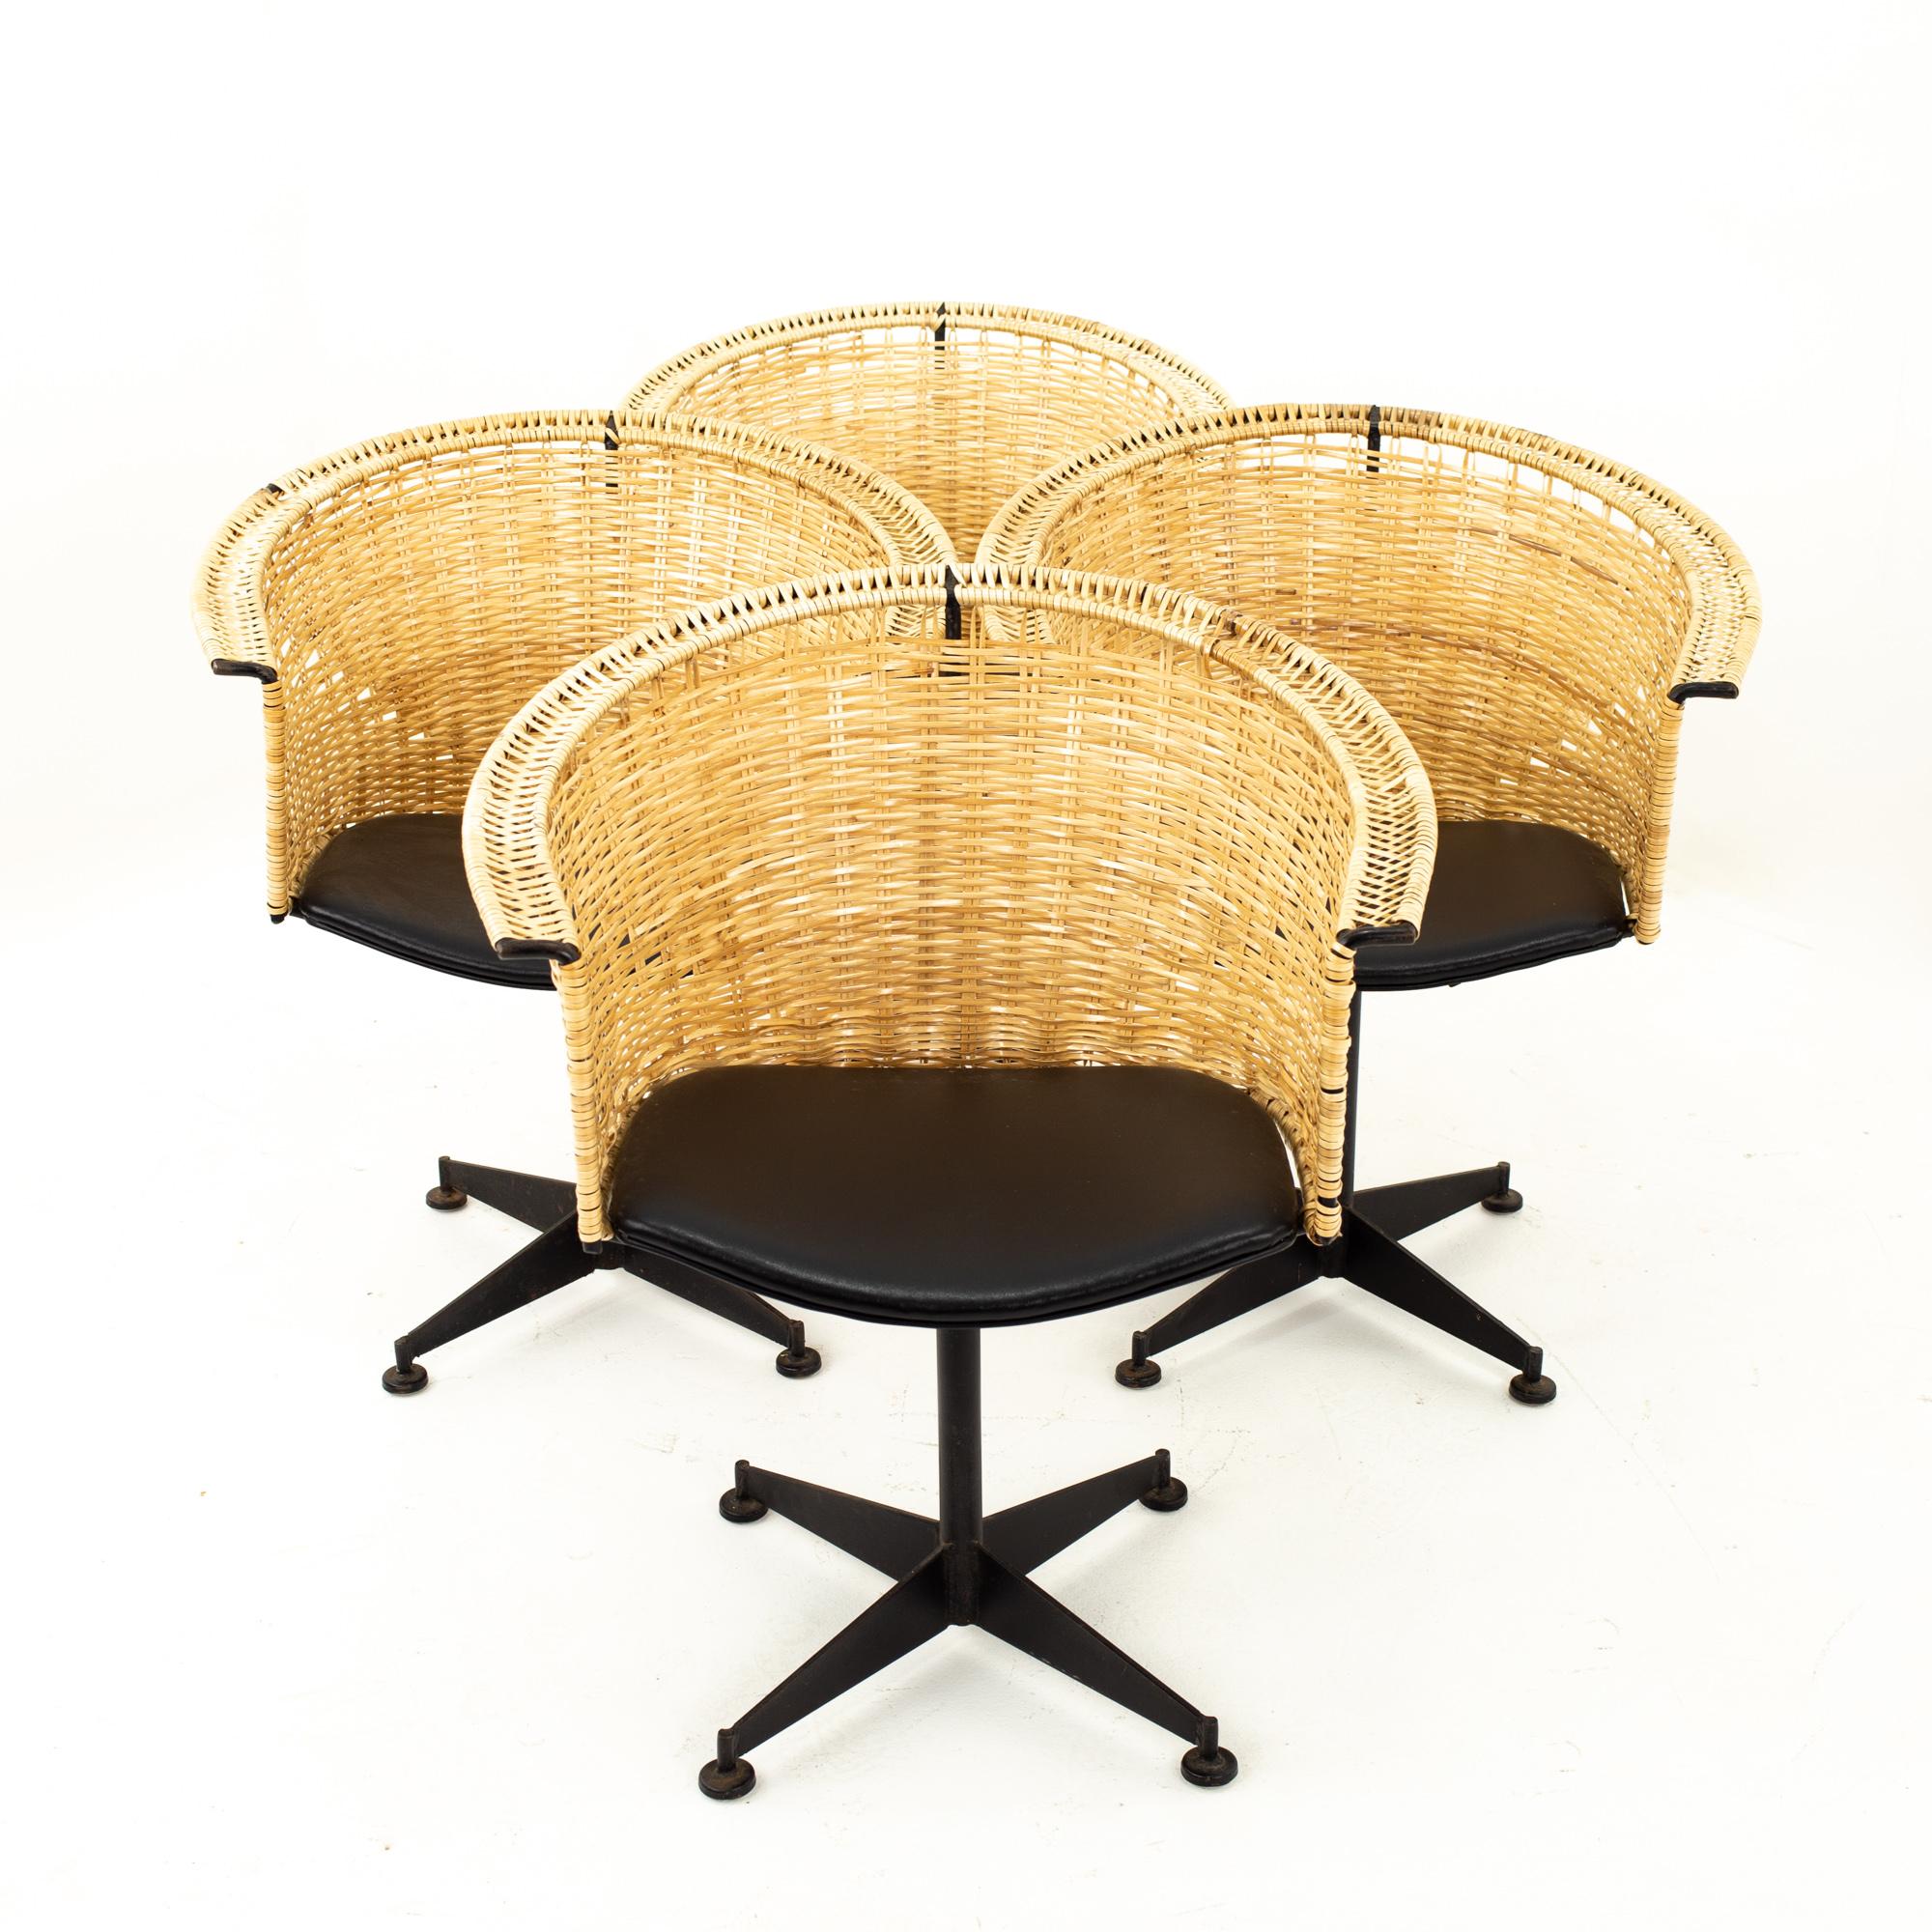 Arthur Umanoff for Shaver Howard midcentury iron and vinyl wicker chairs - Set of 4
Each chair measures: 26.5 wide x 21.5 deep x 31 high, with a seat height of 17.5 inches

All pieces of furniture can be had in what we call restored vintage